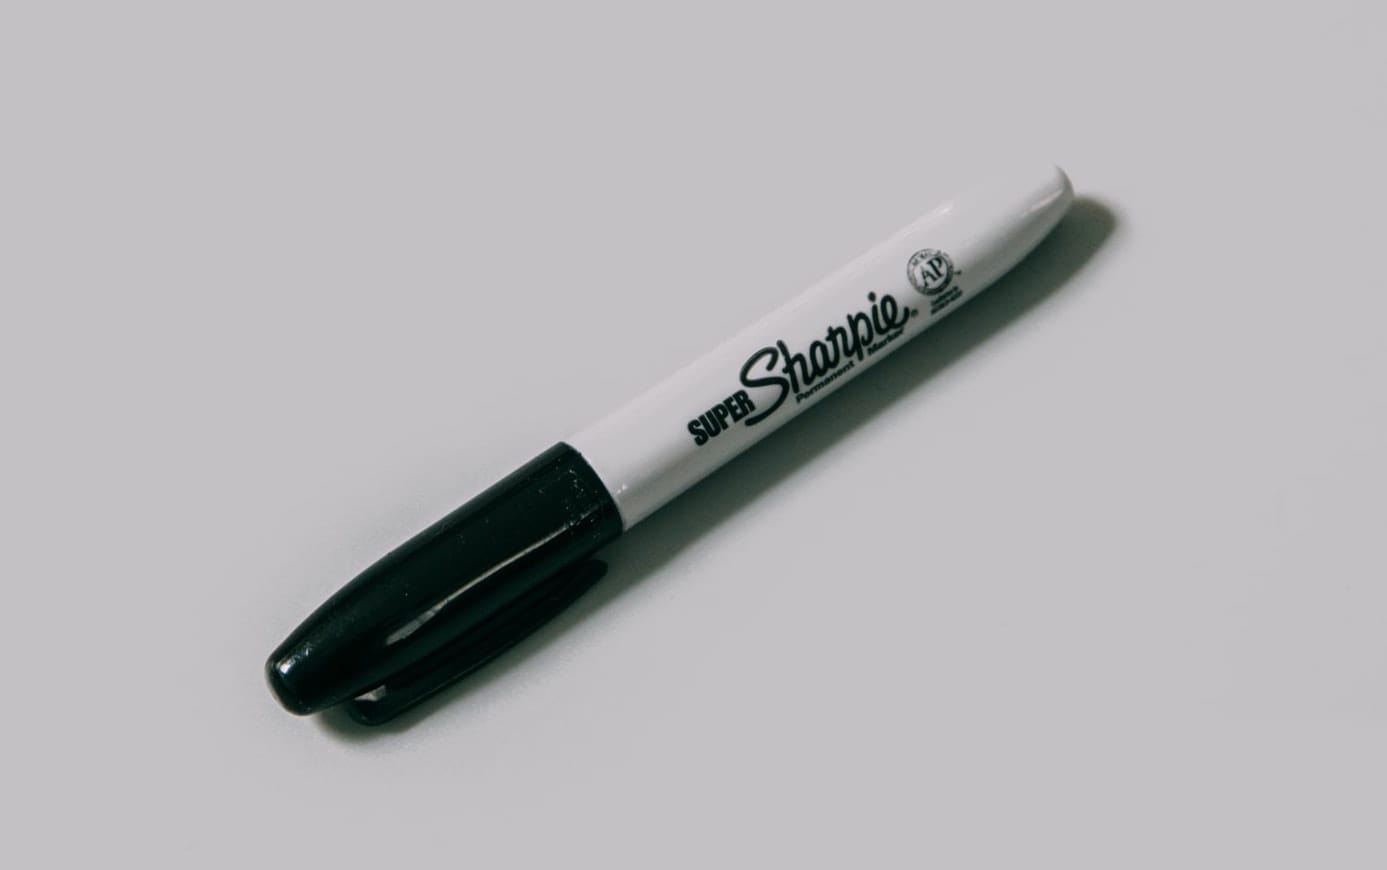 How to Remove Sharpie from Any Surface - The Maids